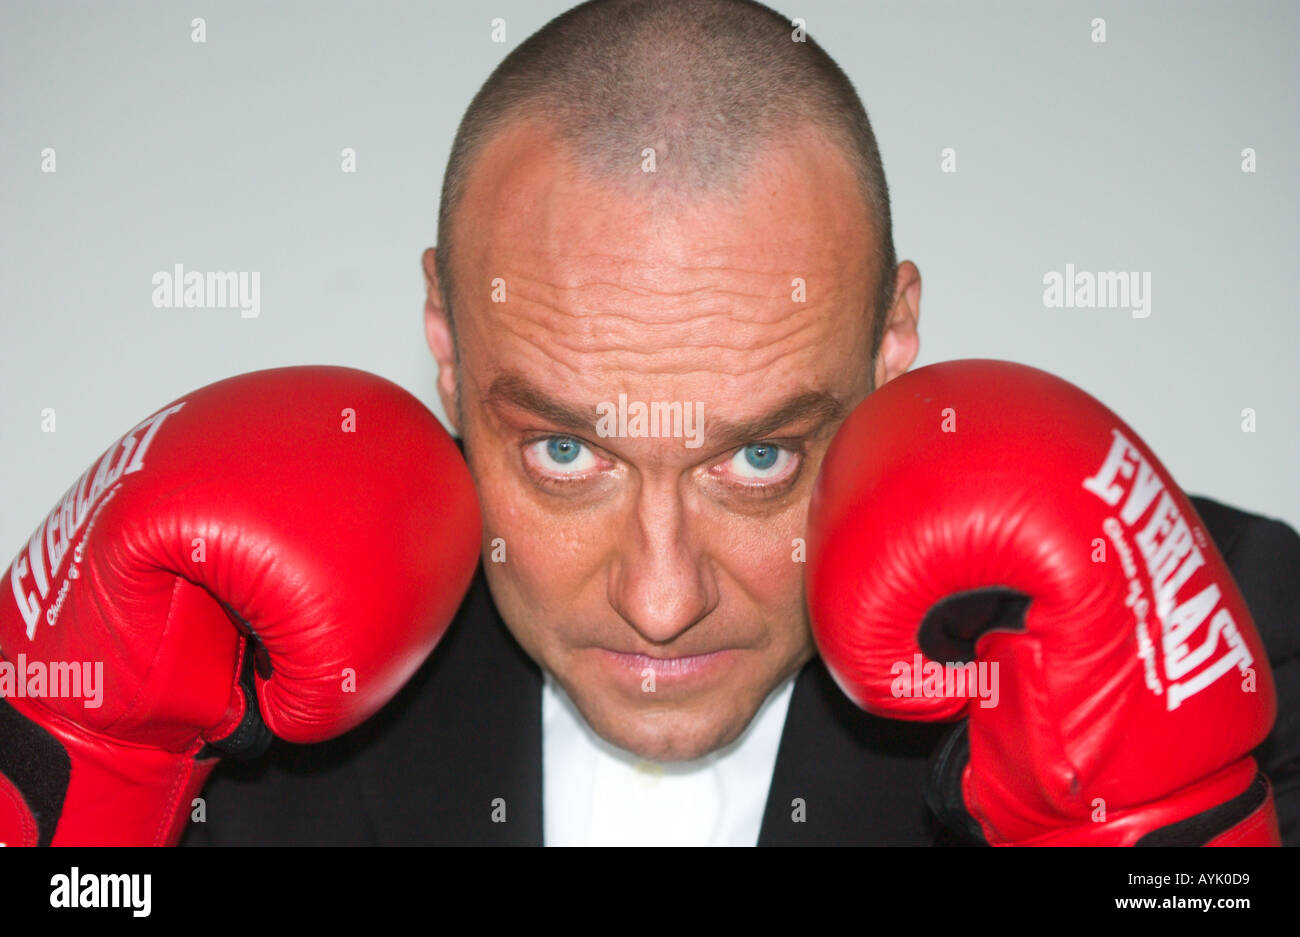 balding man in his 40s wearing a black suit is raising red boxing gloves Stock Photo